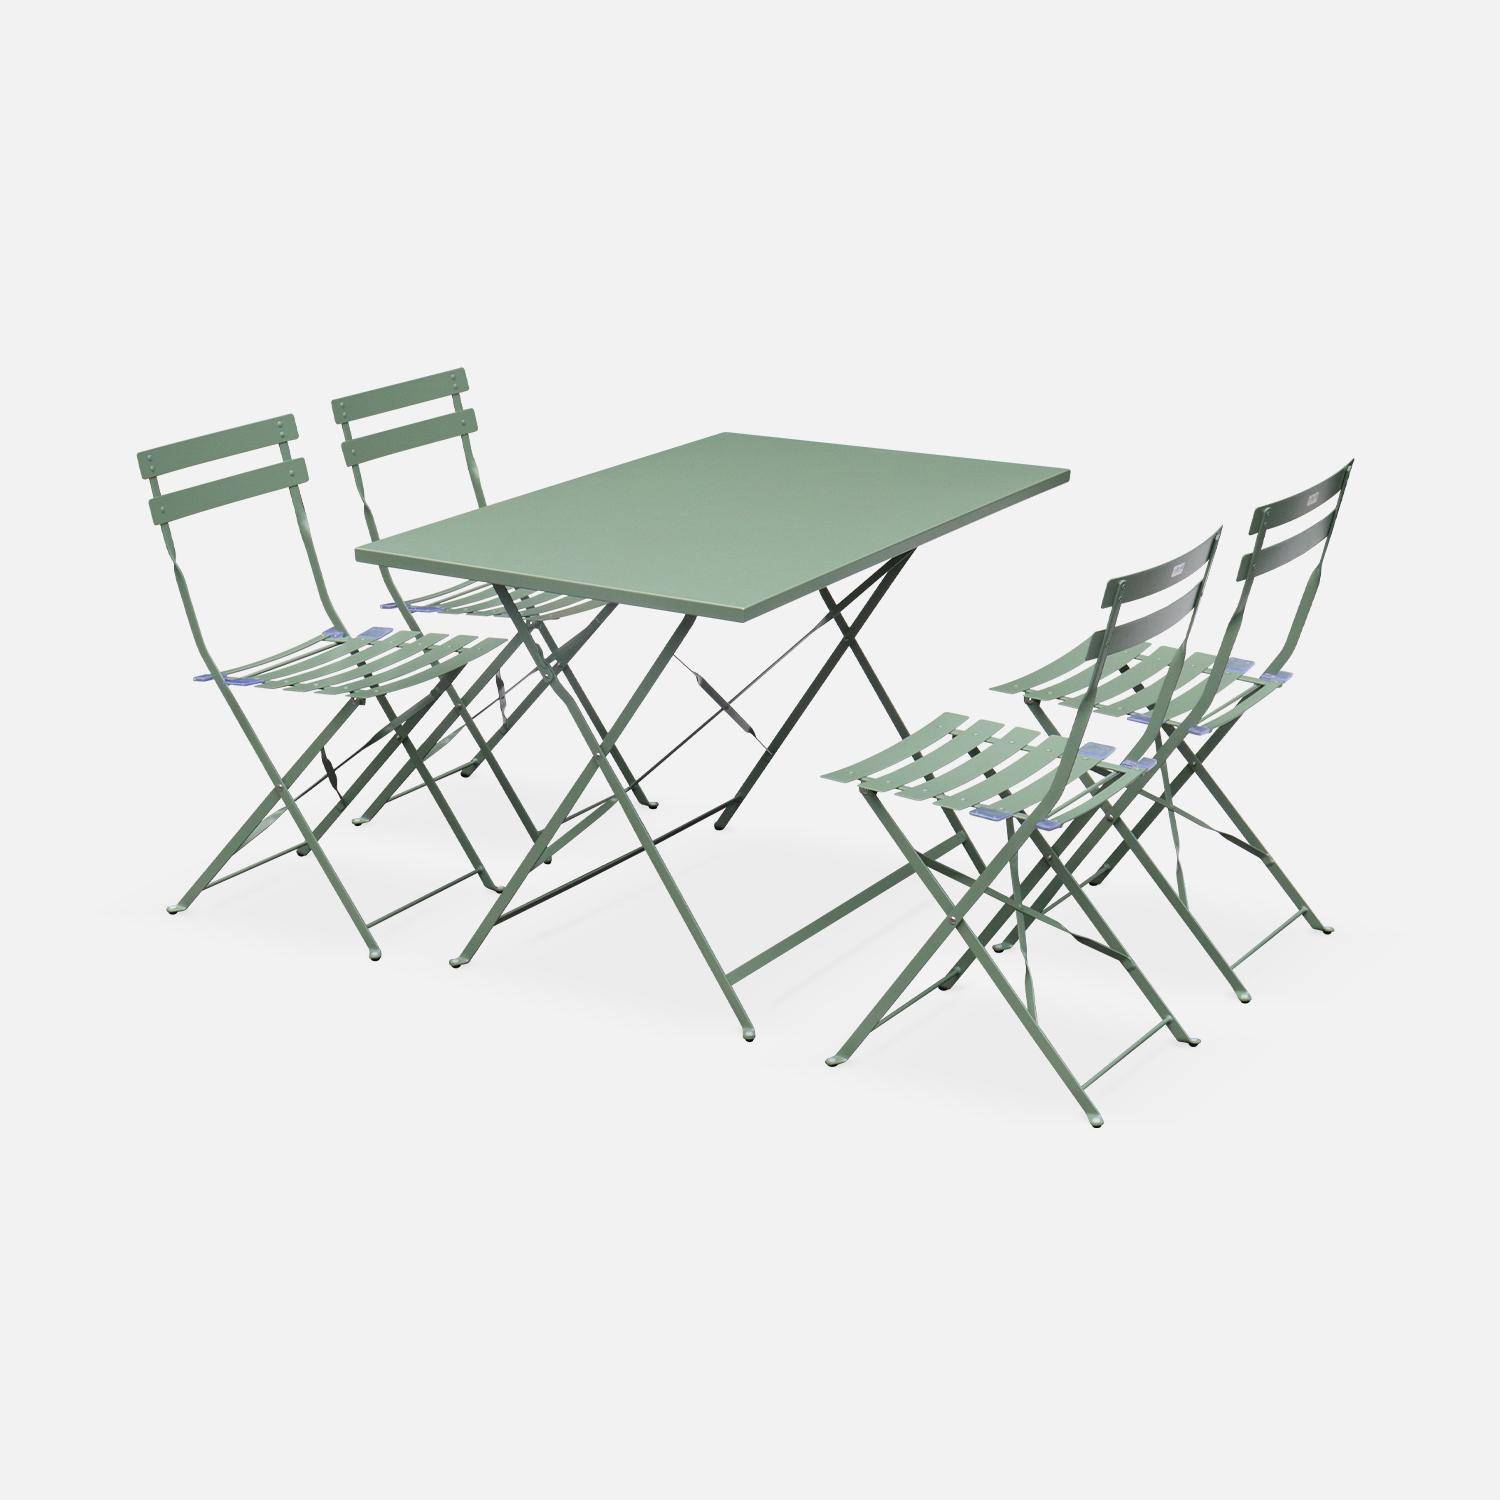 4-seater foldable thermo-lacquered steel bistro garden table with chairs, 110x70cm - Emilia - Sage green Photo2